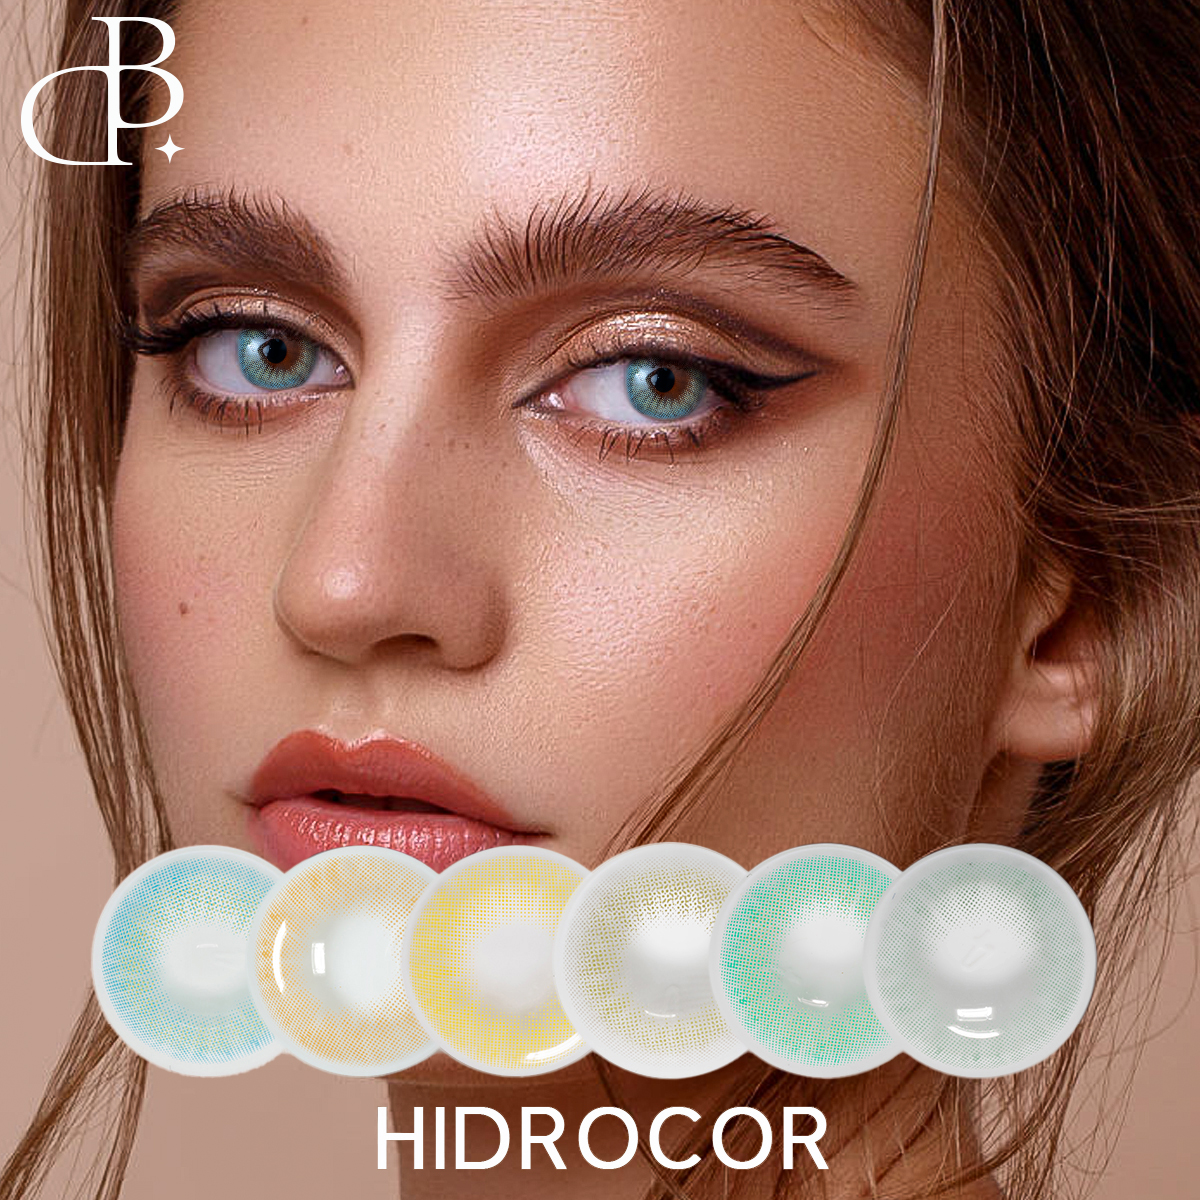 Hidrocor Most Popular New Colors Cosmetic Eye Contact Lenses Wholesale Yearly Prescription From 0 to 800 with box